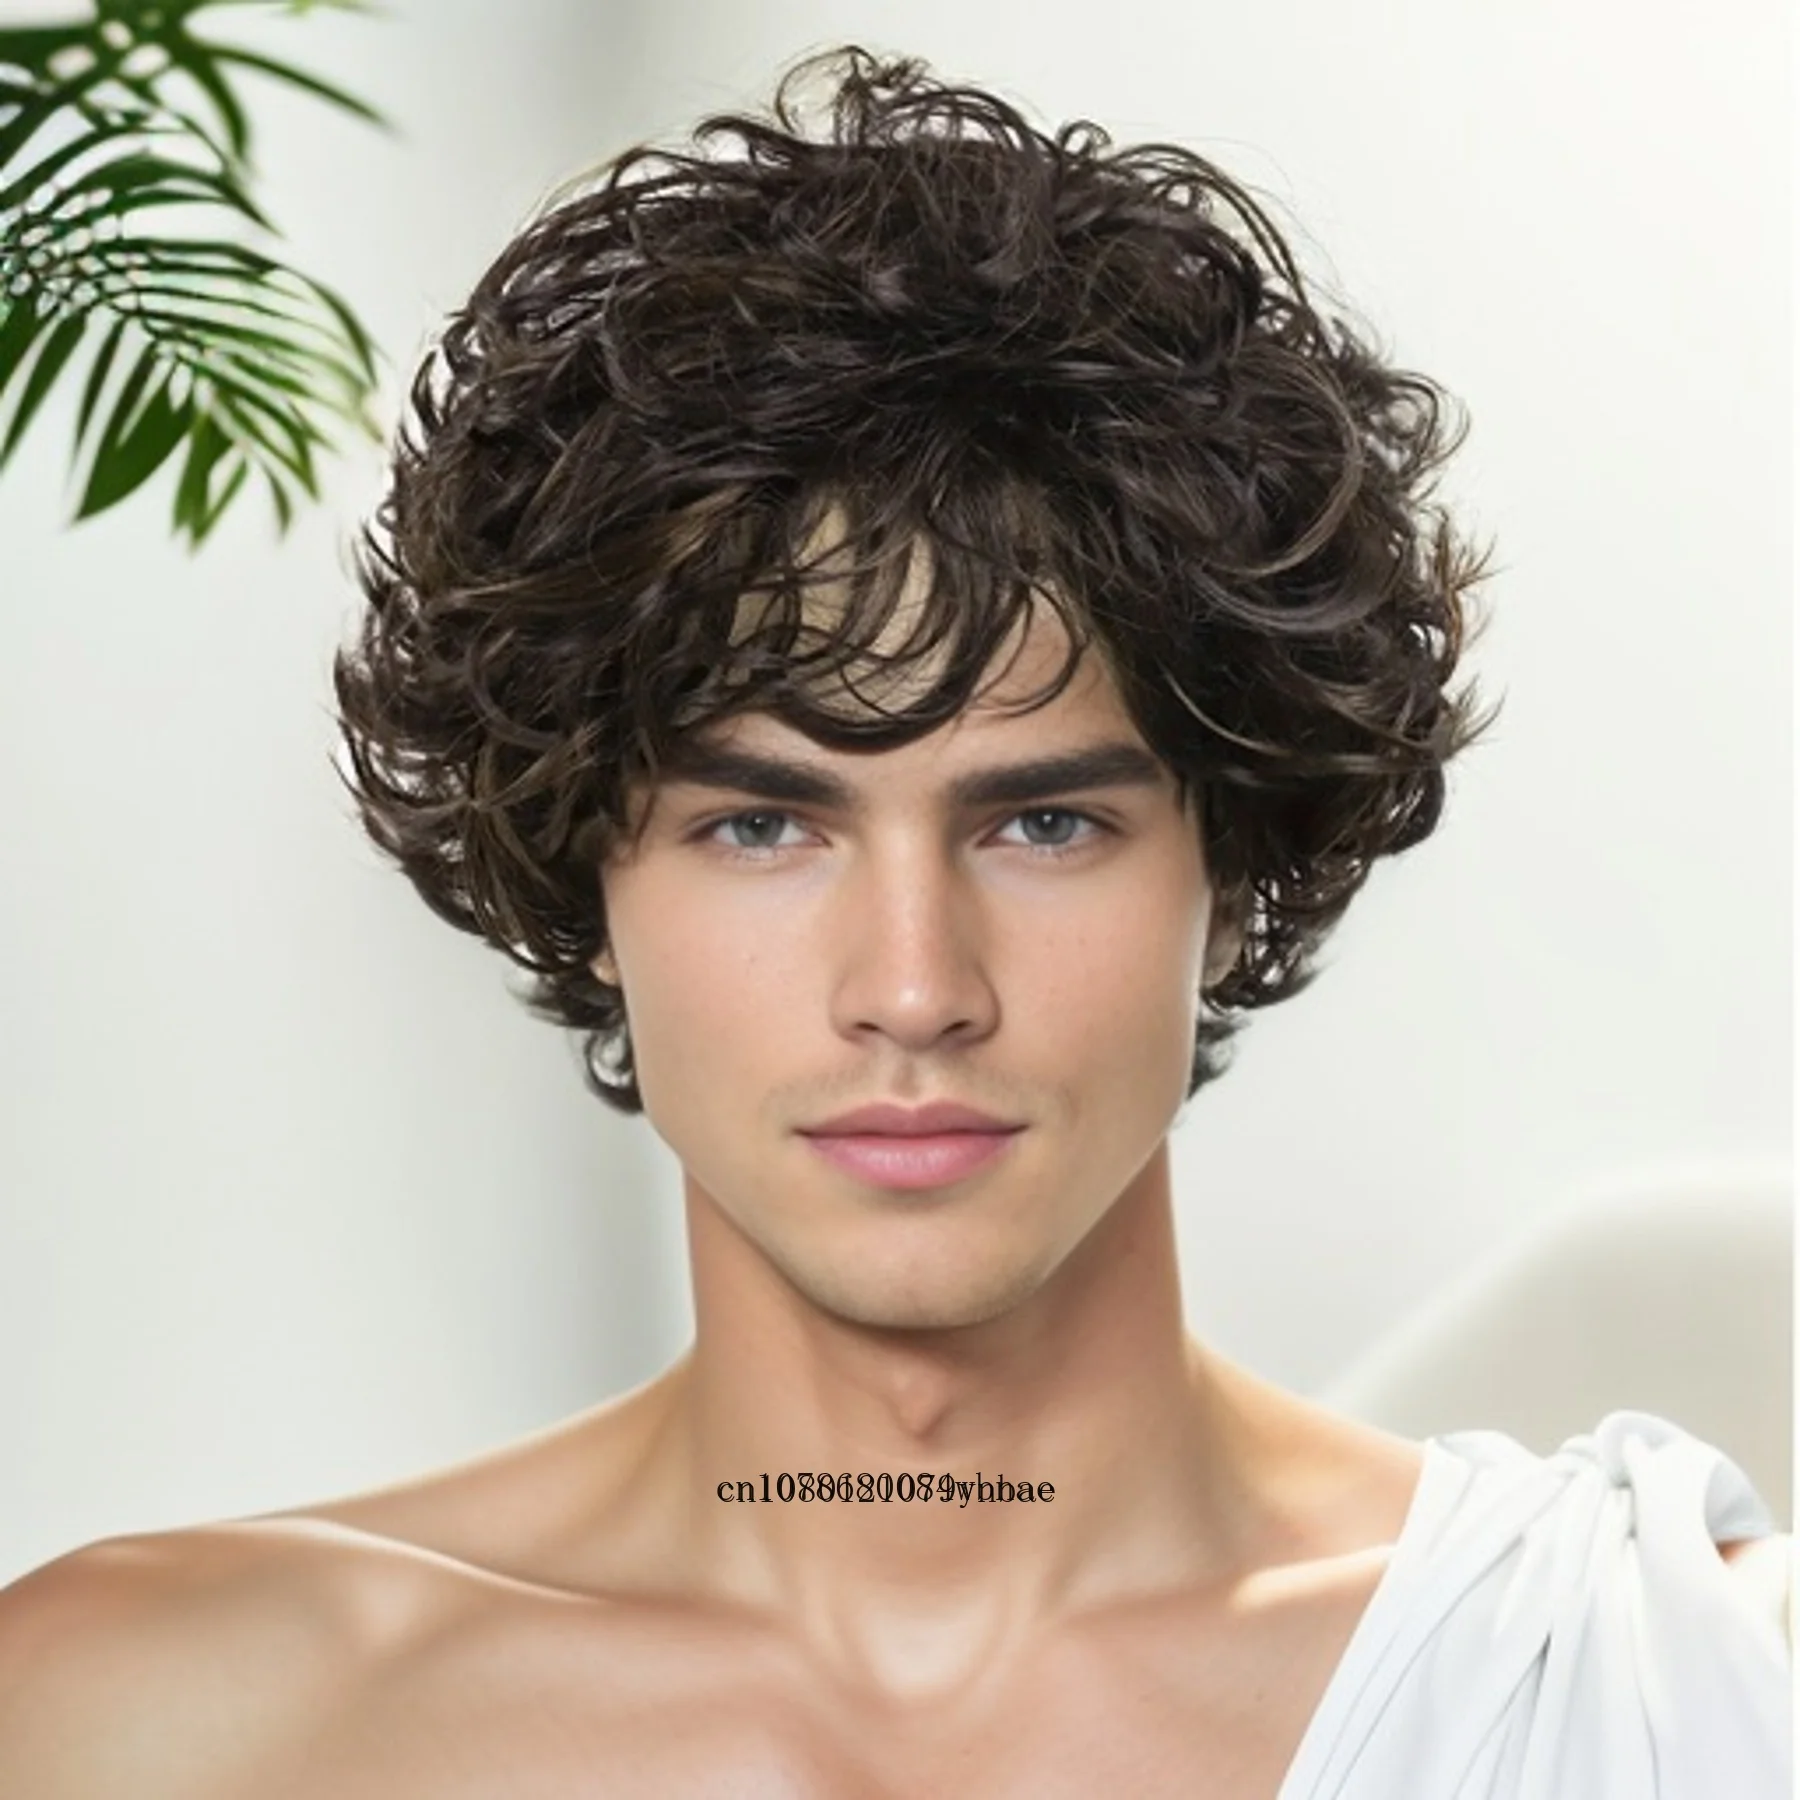 Trendy Short Curly Wigs Synthetic Fiber for Men Mix Brown Color Hair Replacement Wig Natural Hairstyles Daily Costume Cosplay